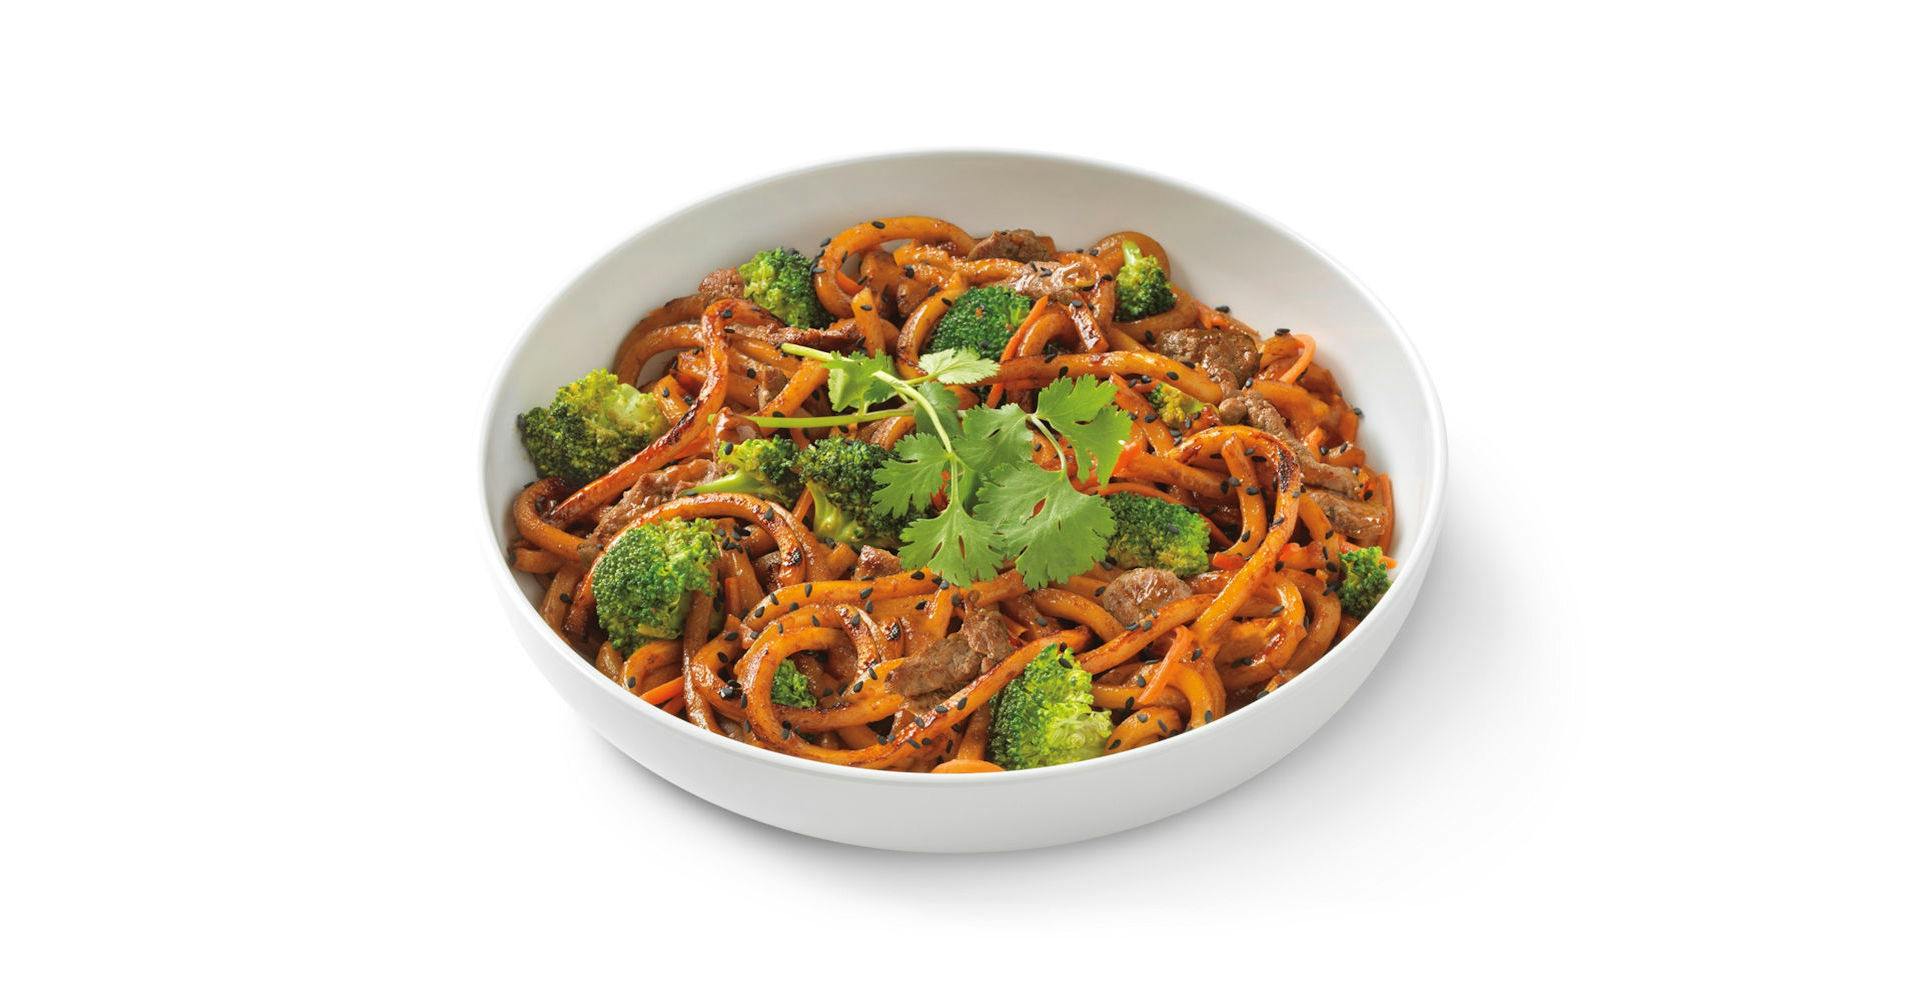 Japanese Pan Noodles with Marinated Steak from Noodles & Company - Wausau Town Center in Wausau, WI